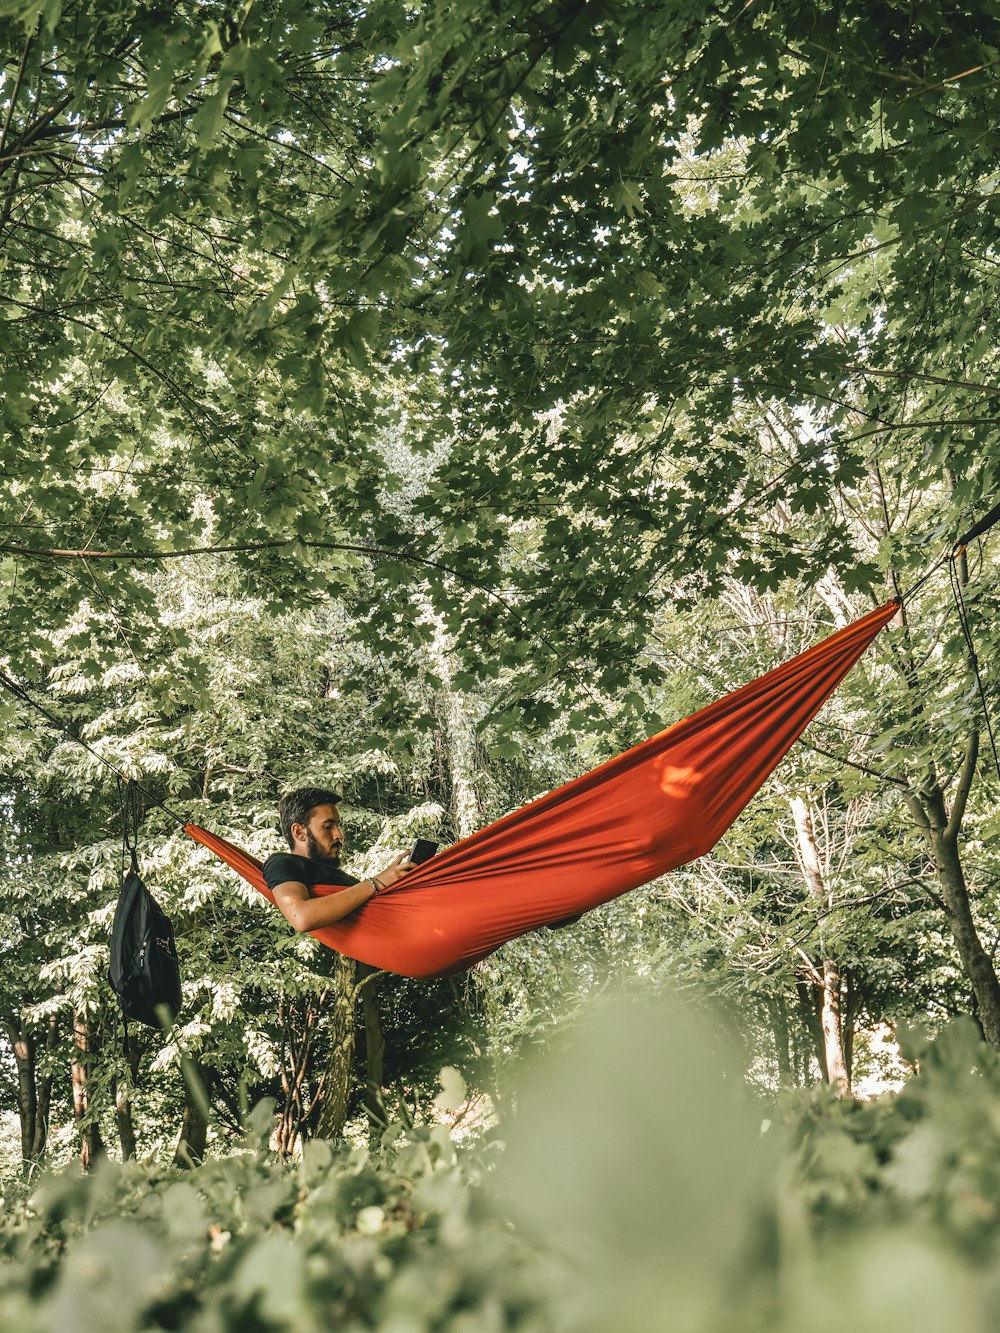 man on red hammock surrounded by trees during daytime